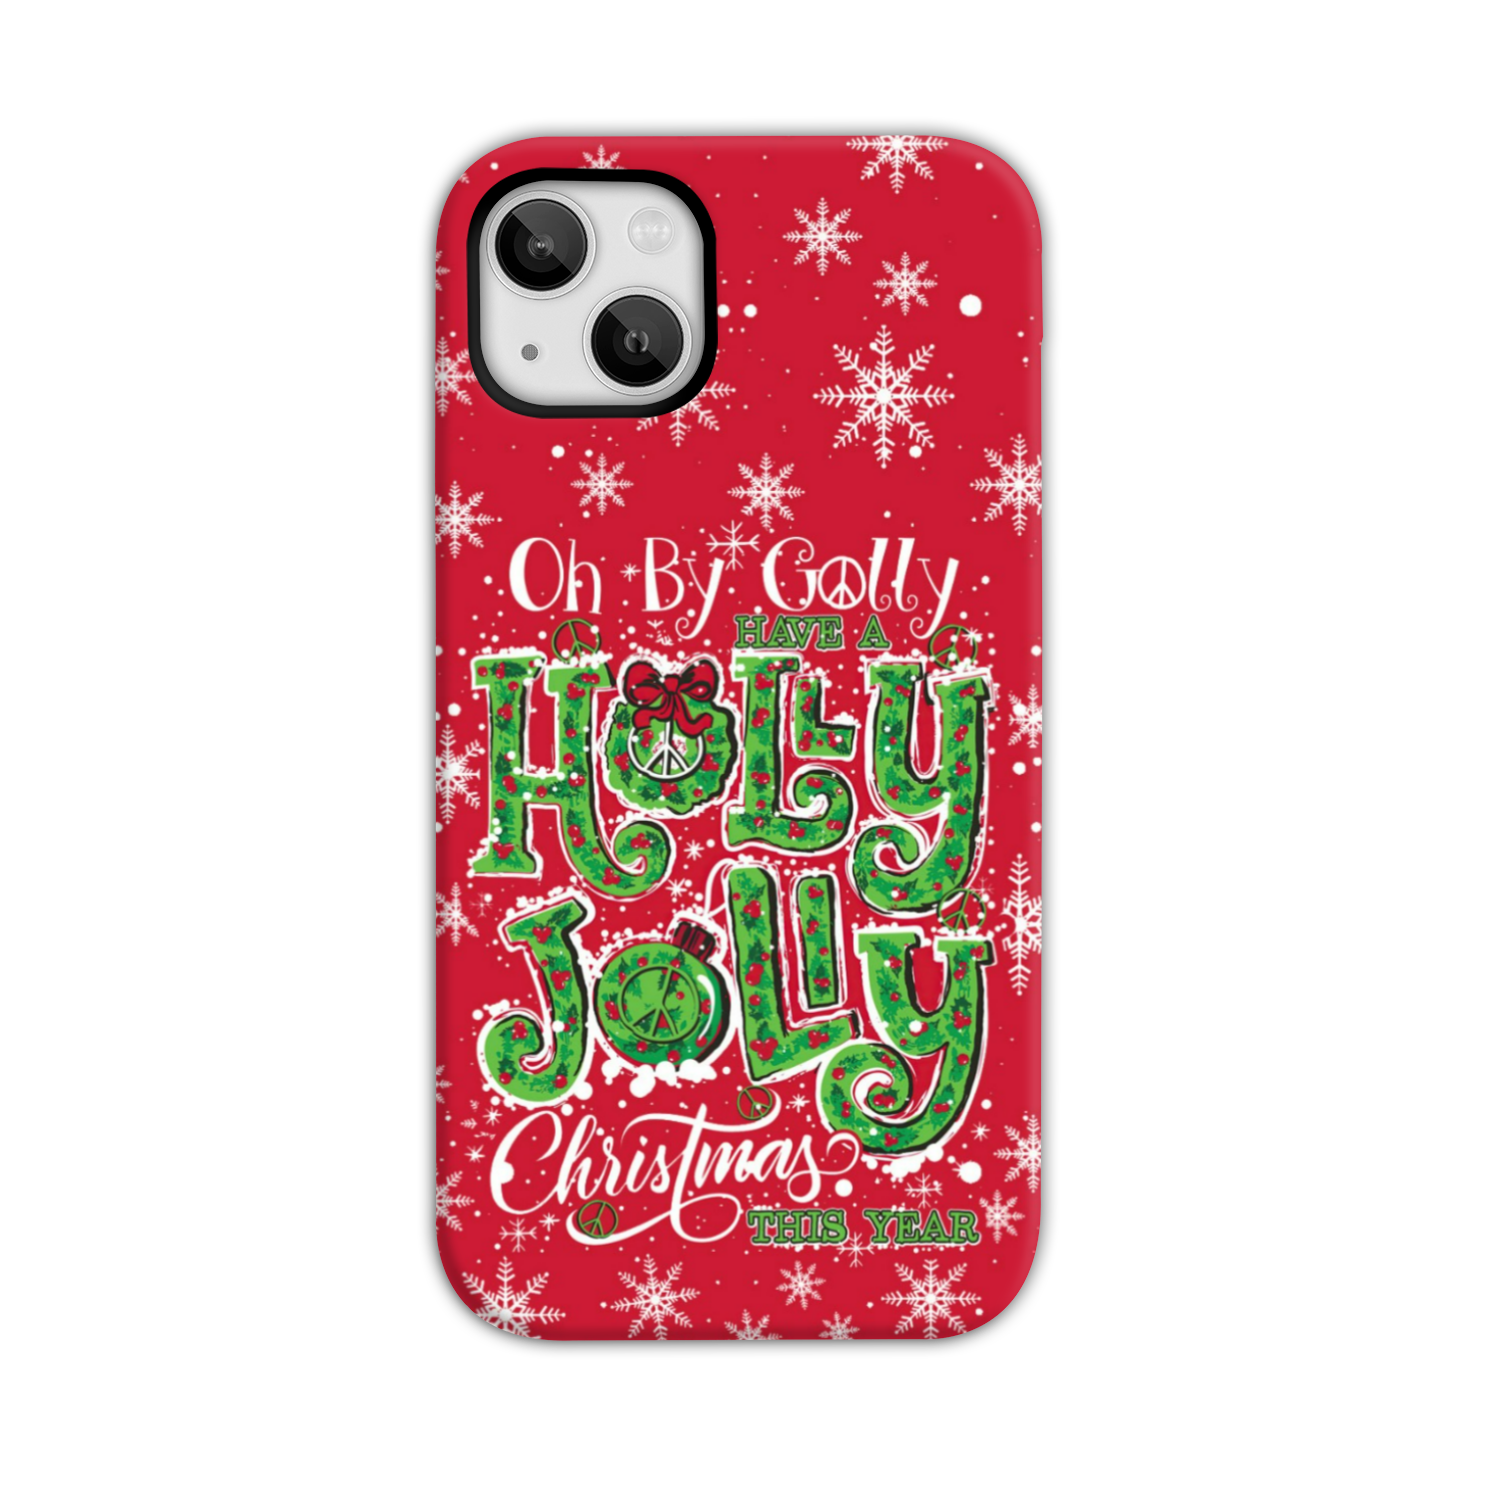 OH BY GOLLY CHRISTMAS PHONE CASE - TY2710232